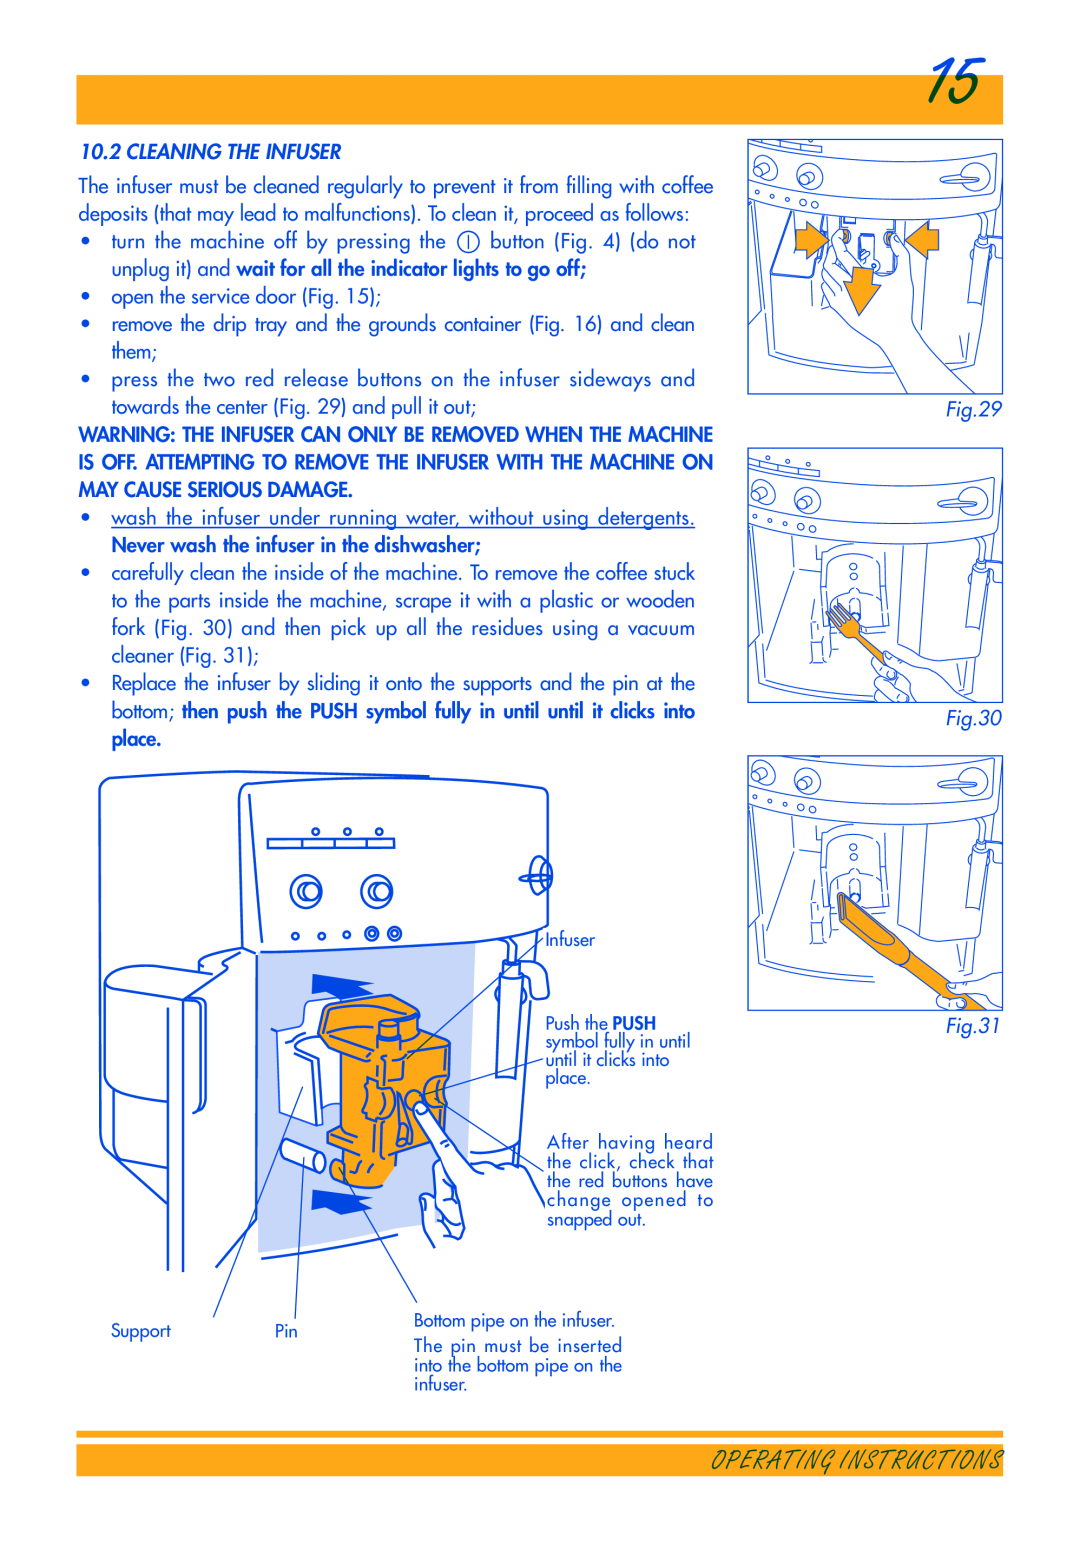 DeLonghi ESAM3300 manual Operating Instructions, Cleaning The Infuser, open the service door Fig 